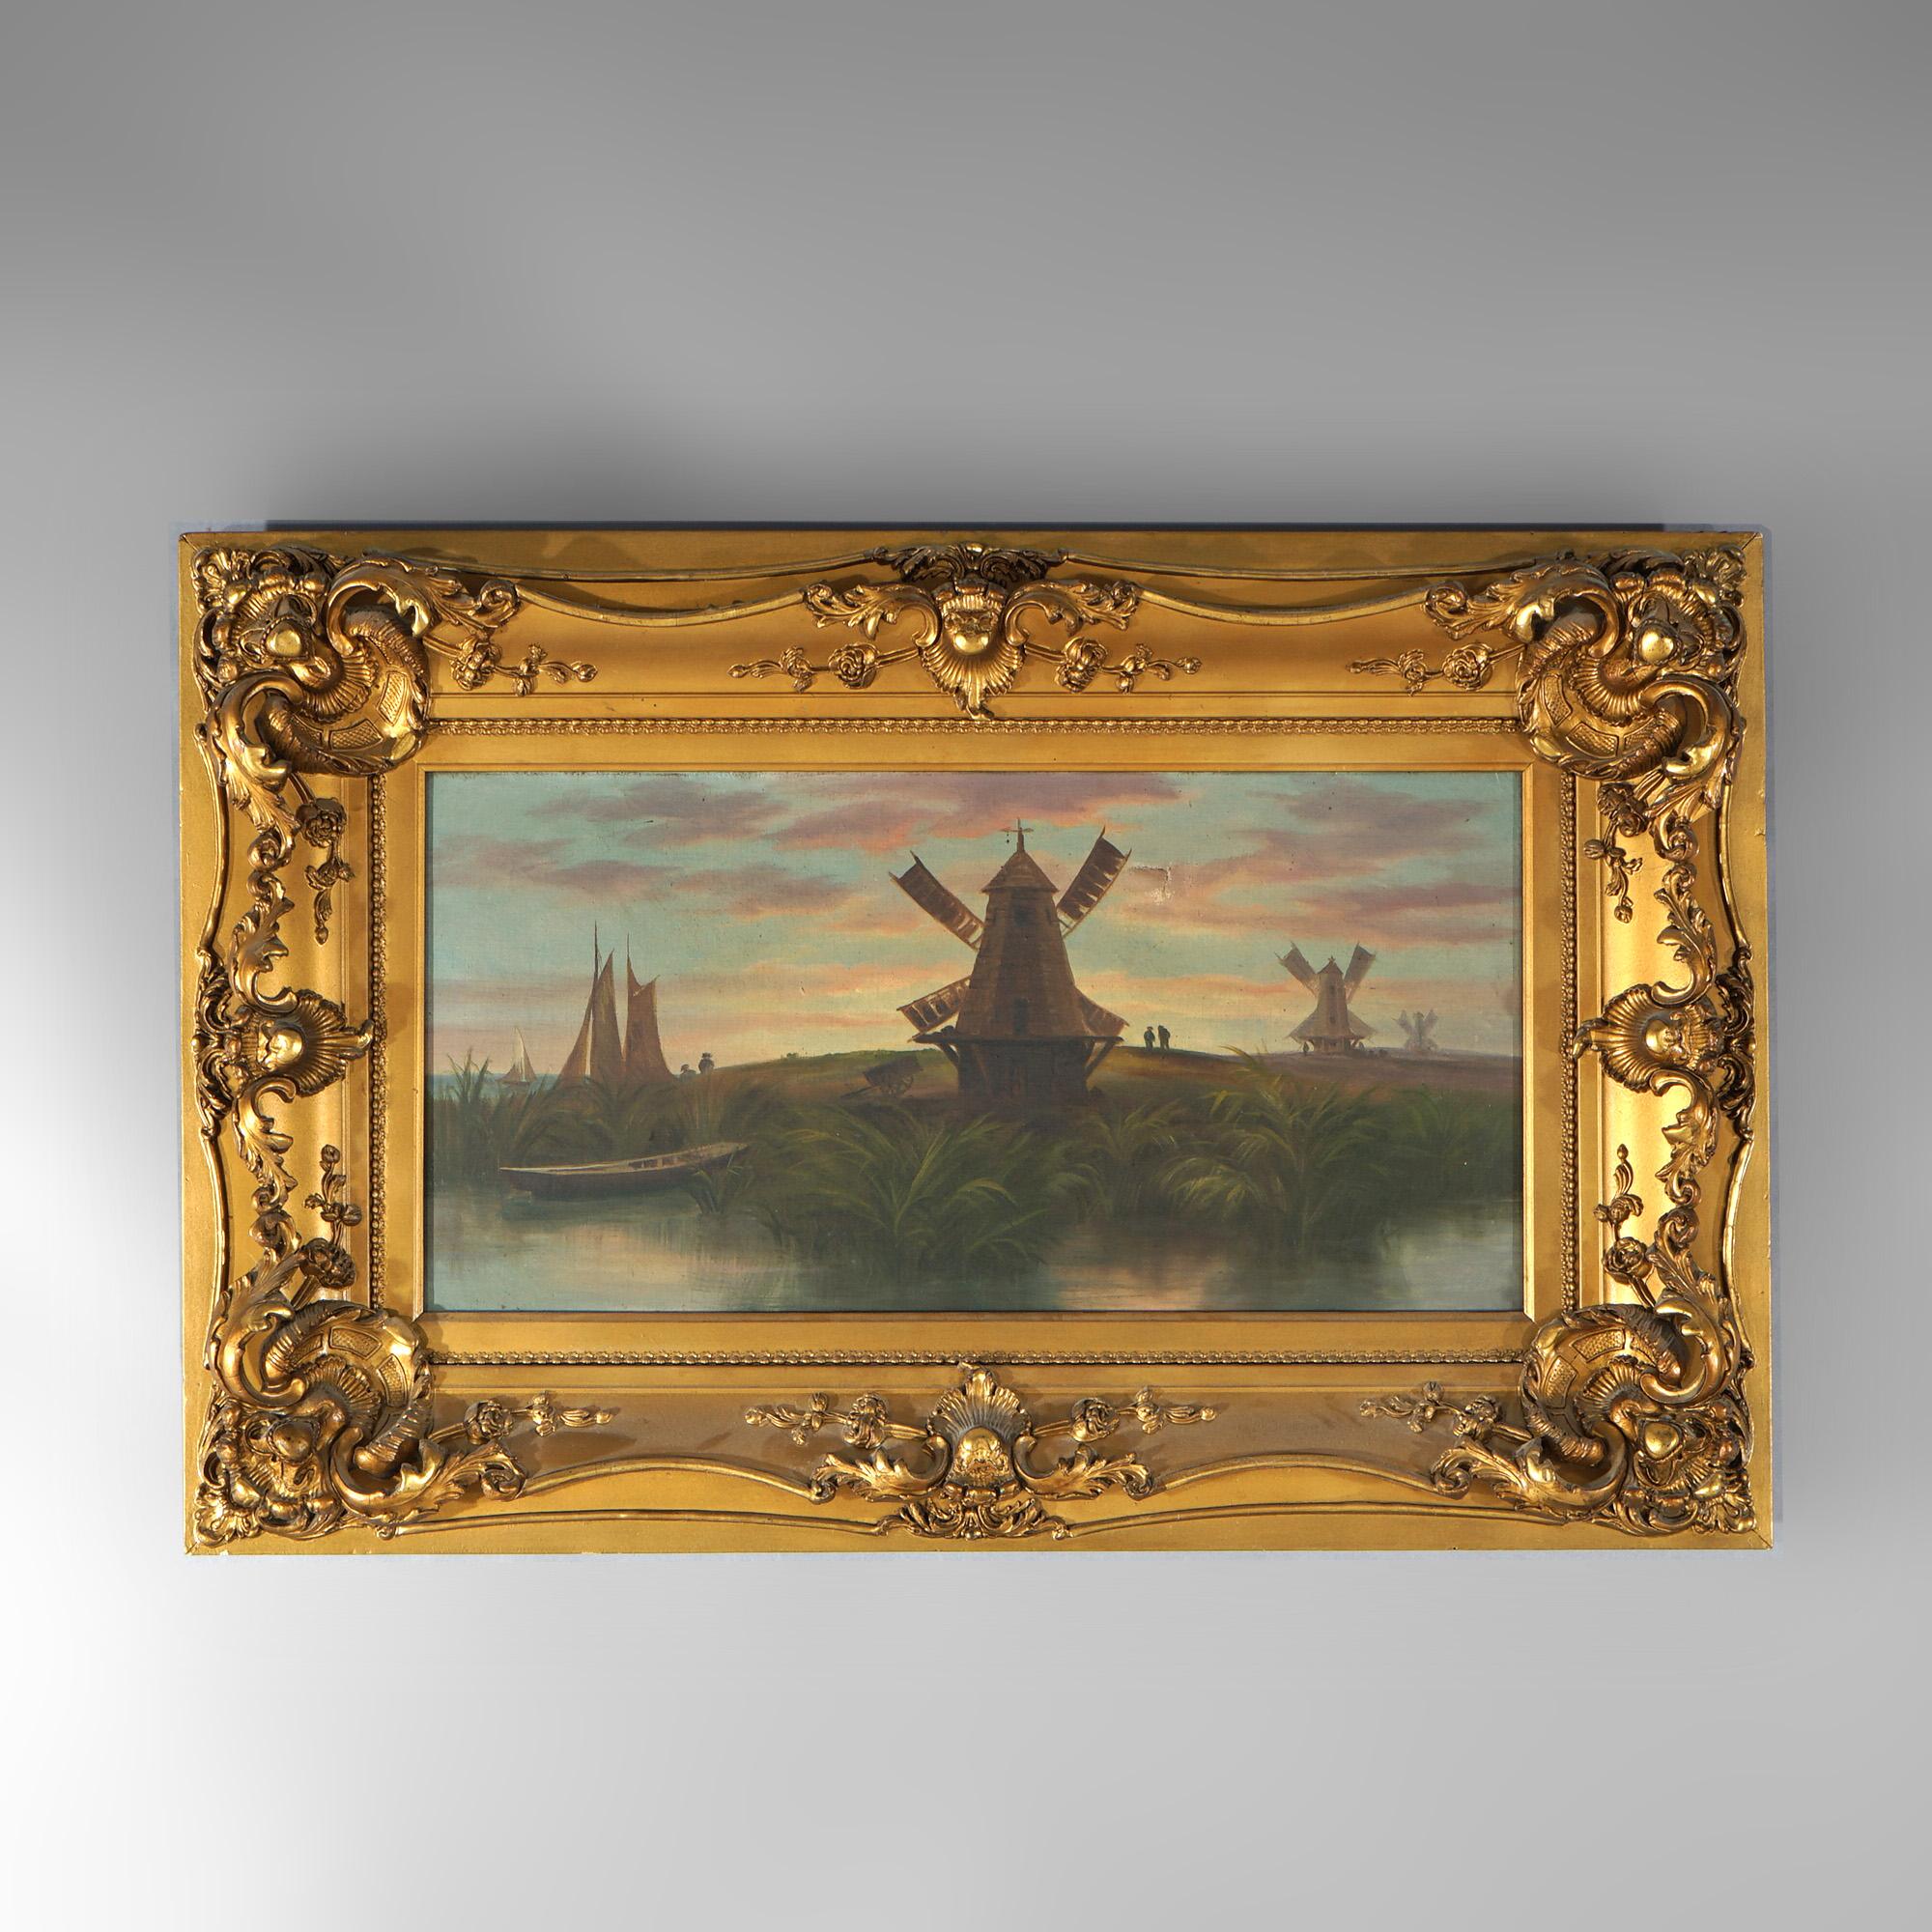 An antique Dutch painting offers oil on canvas landscape scene with windmills, waterway and boats, seated in giltwood frame, c1890

Measures - overall 21.75